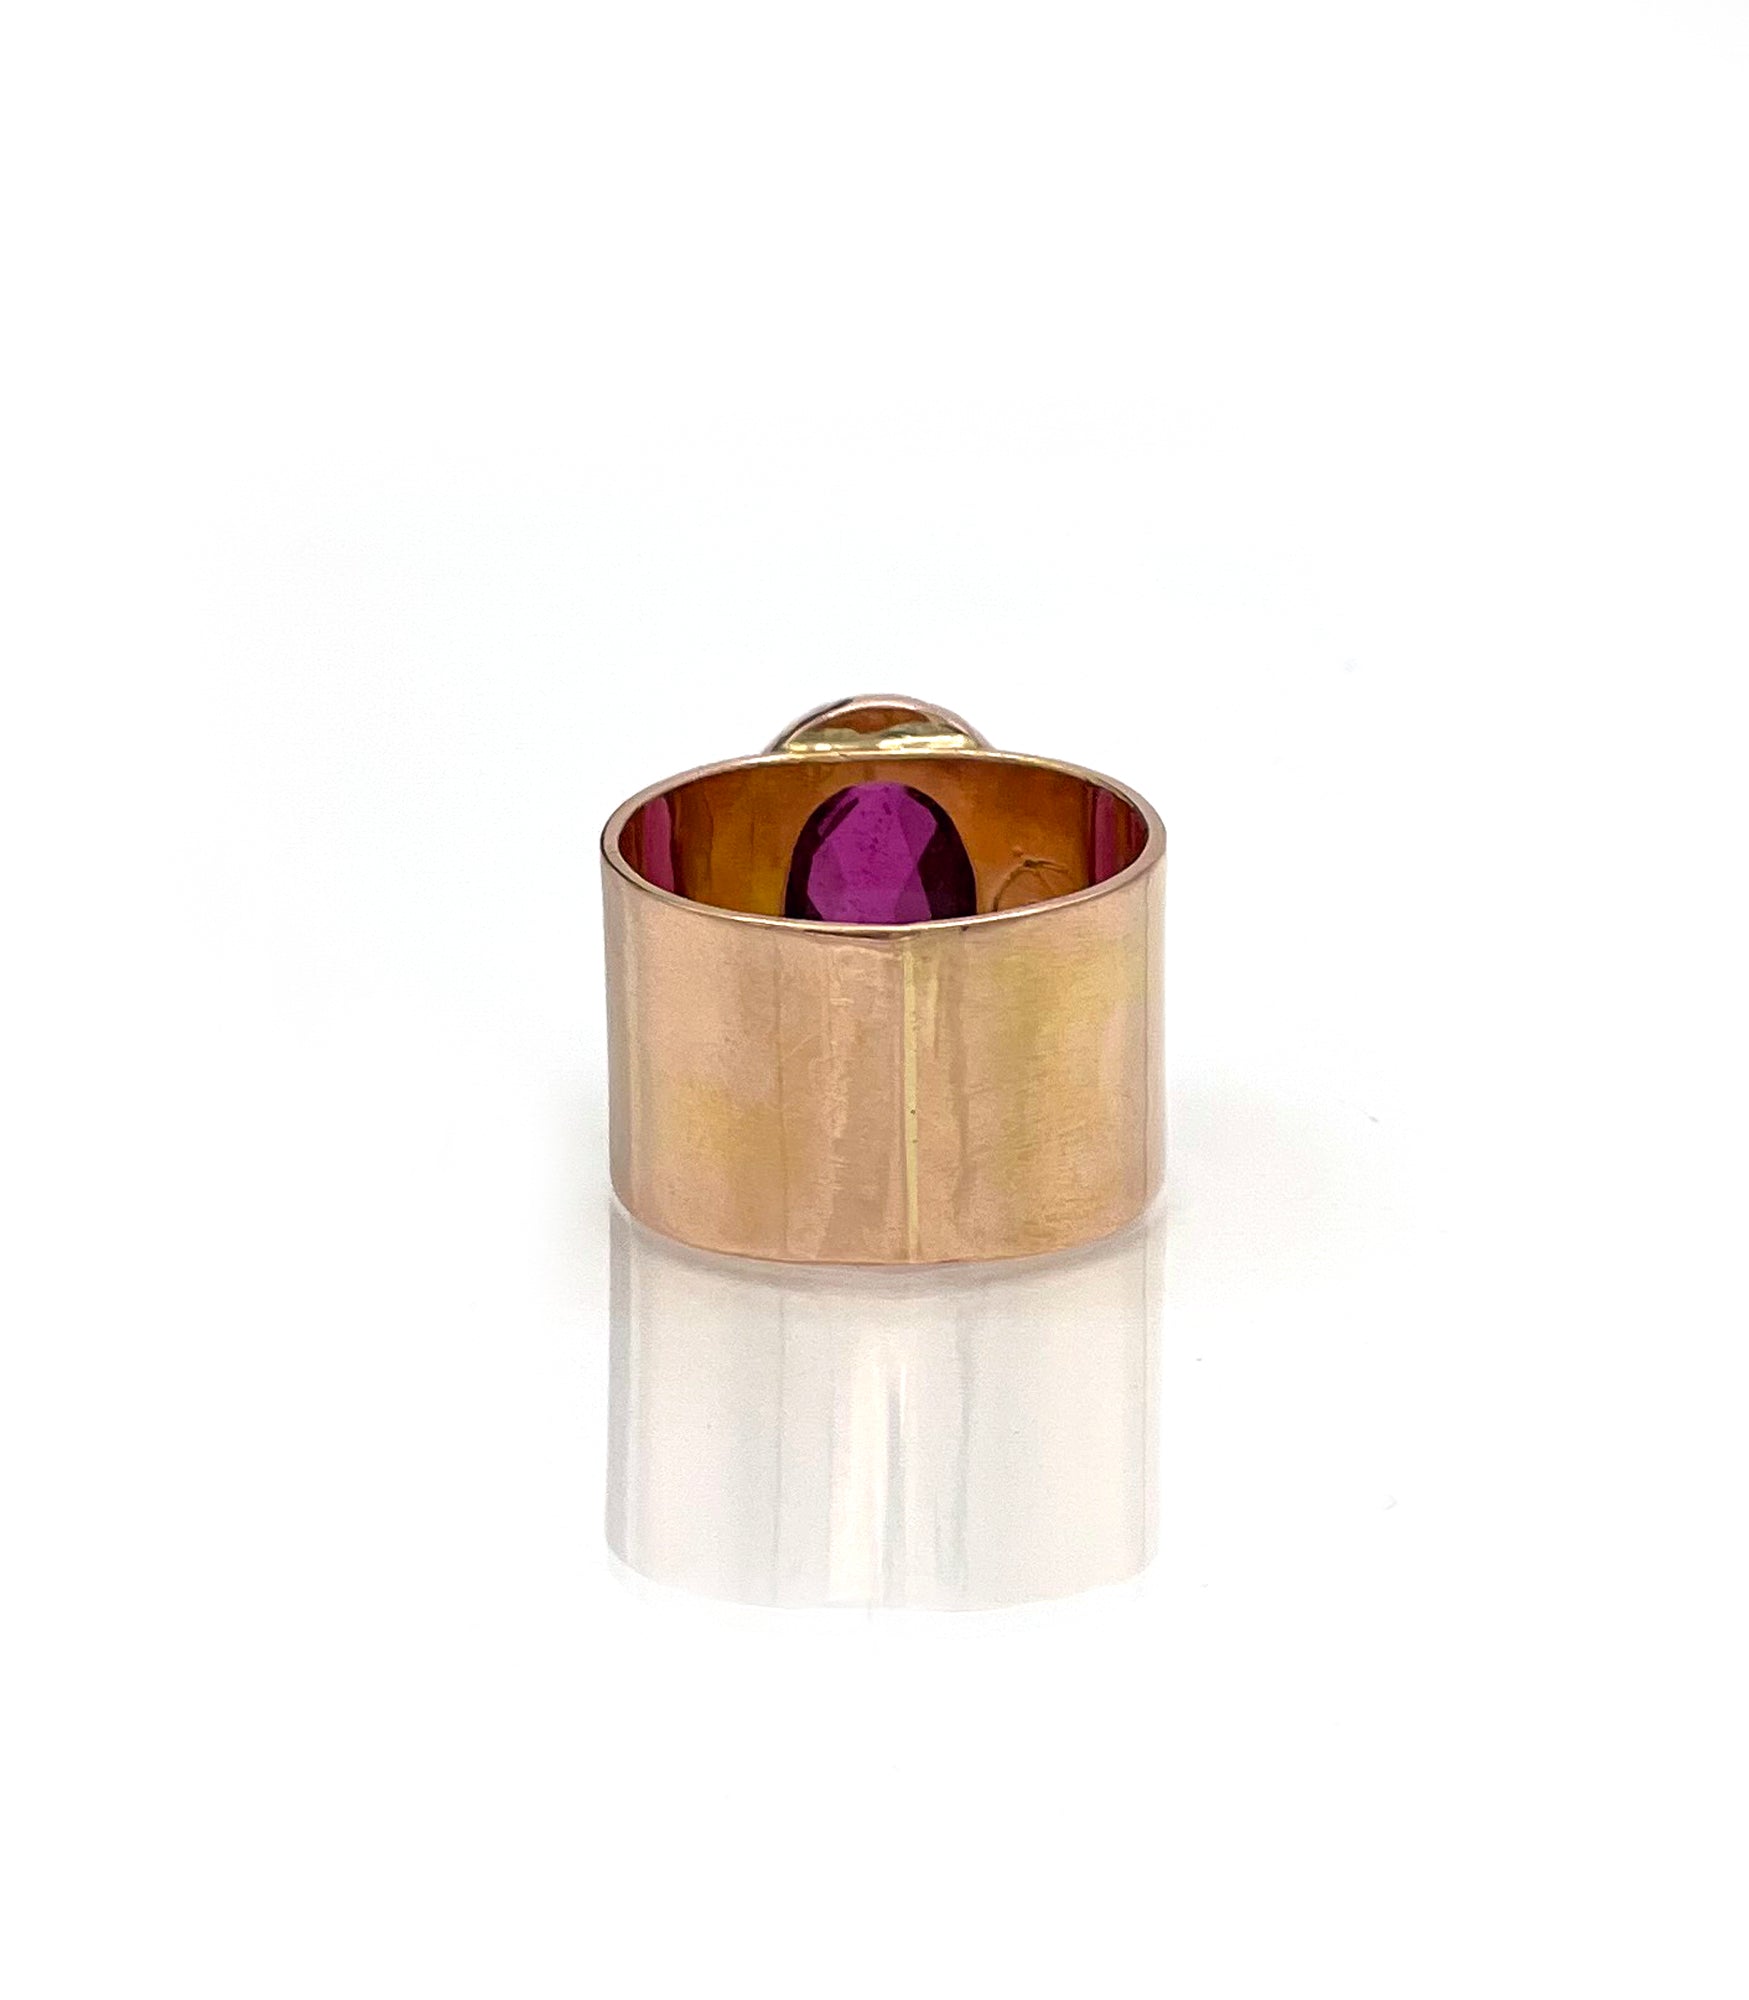 14K Rubellite Tourmaline Ring, Wide Band Ring, SOLID Rose Gold